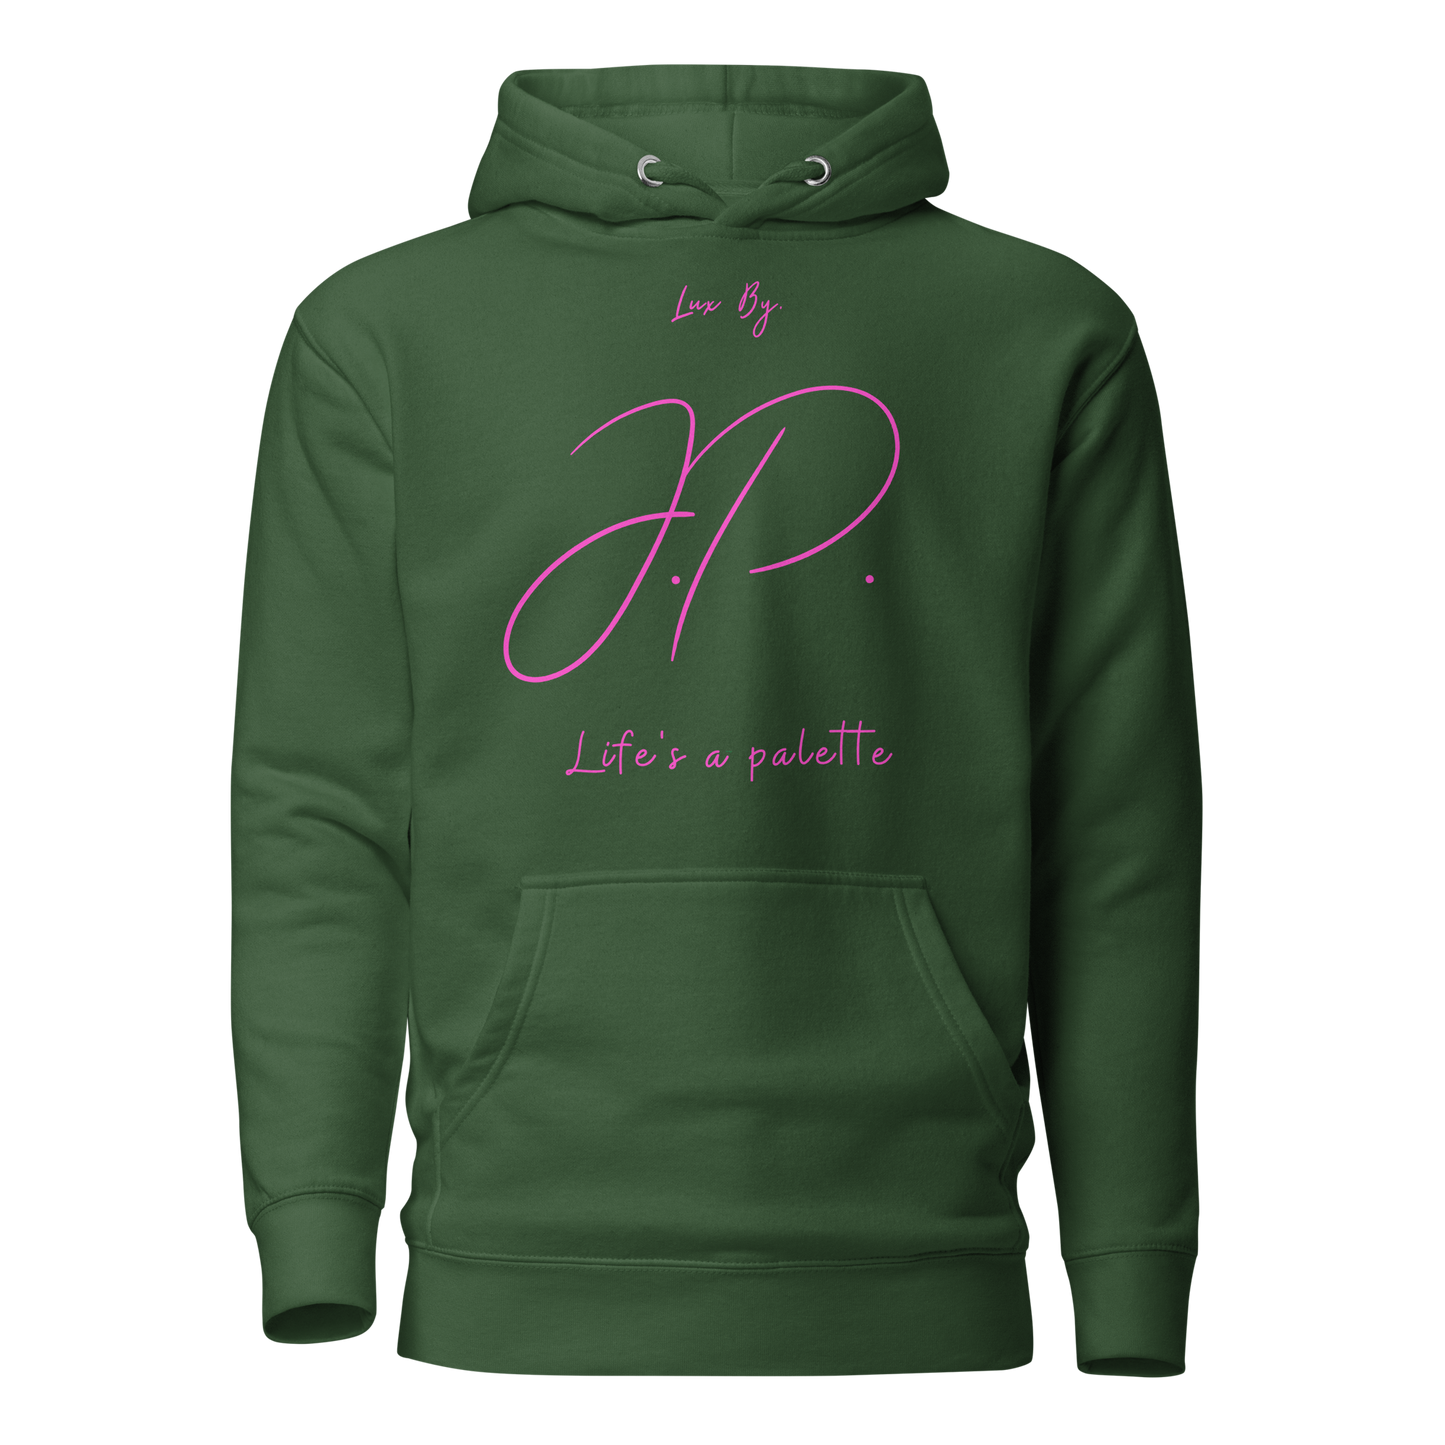 Lux. Hoodie - Forest Green - Life's a palette edition